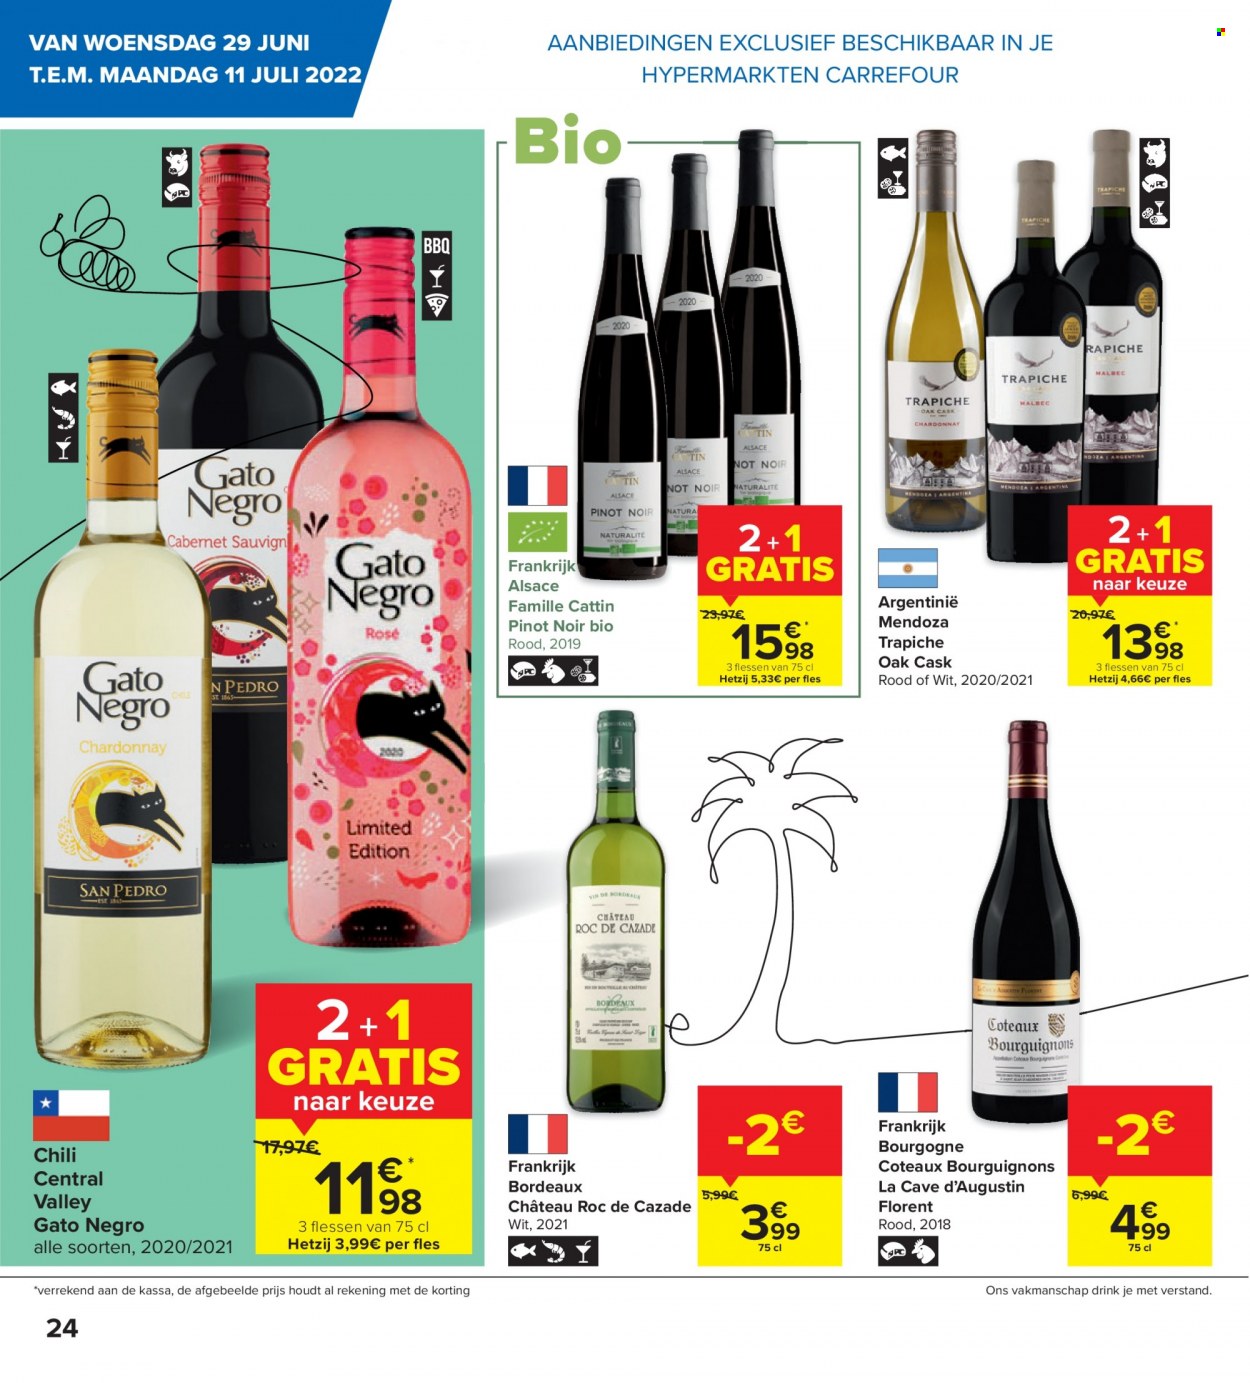 Catalogue Carrefour hypermarkt - 29.6.2022 - 11.7.2022. Page 4.